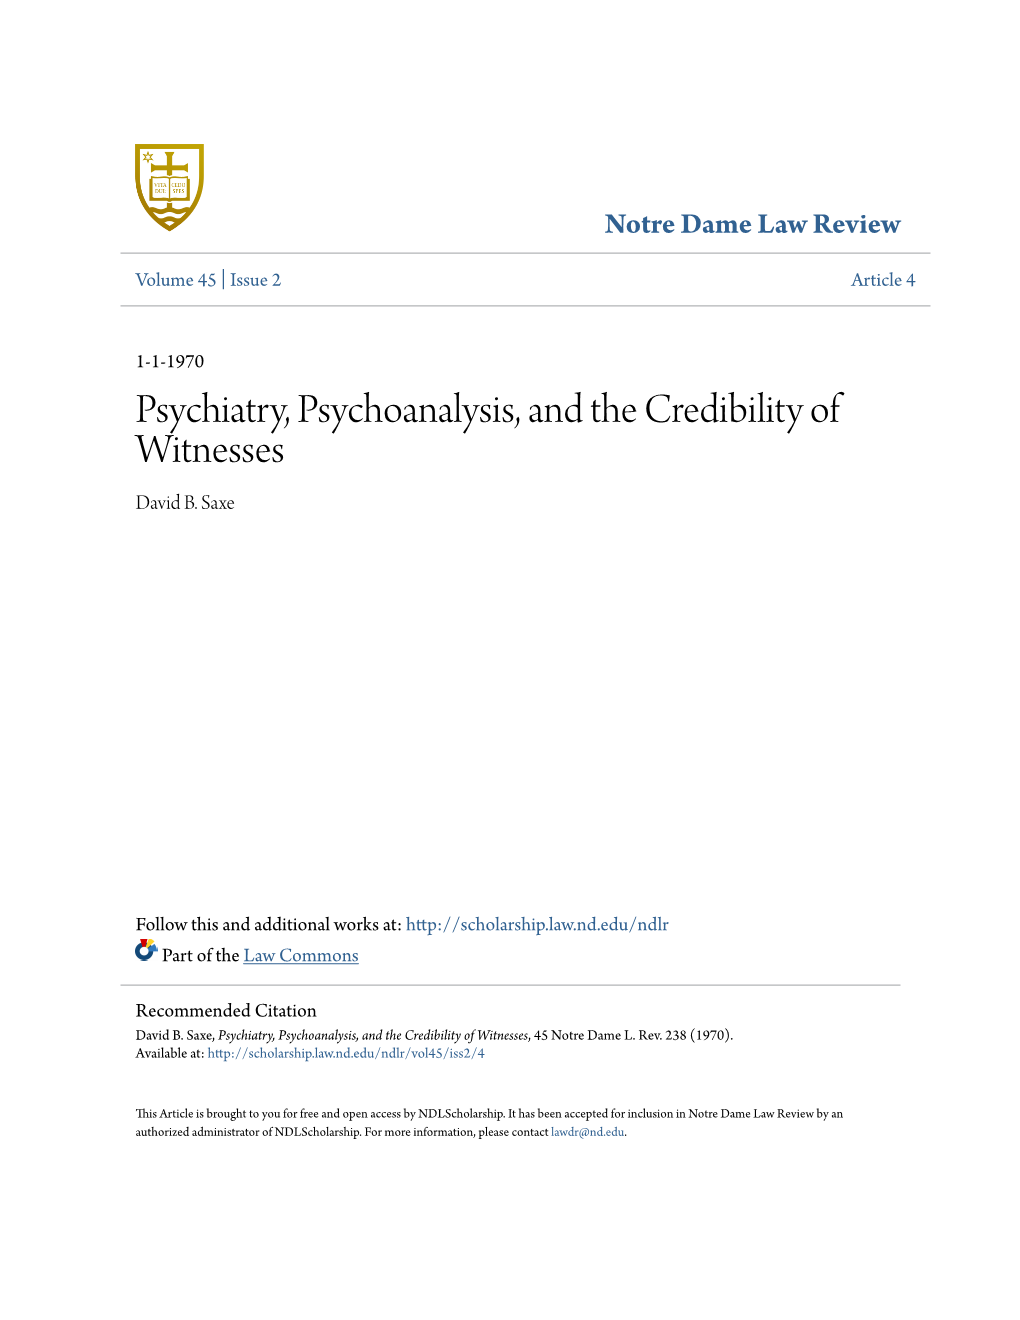 Psychiatry, Psychoanalysis, and the Credibility of Witnesses David B